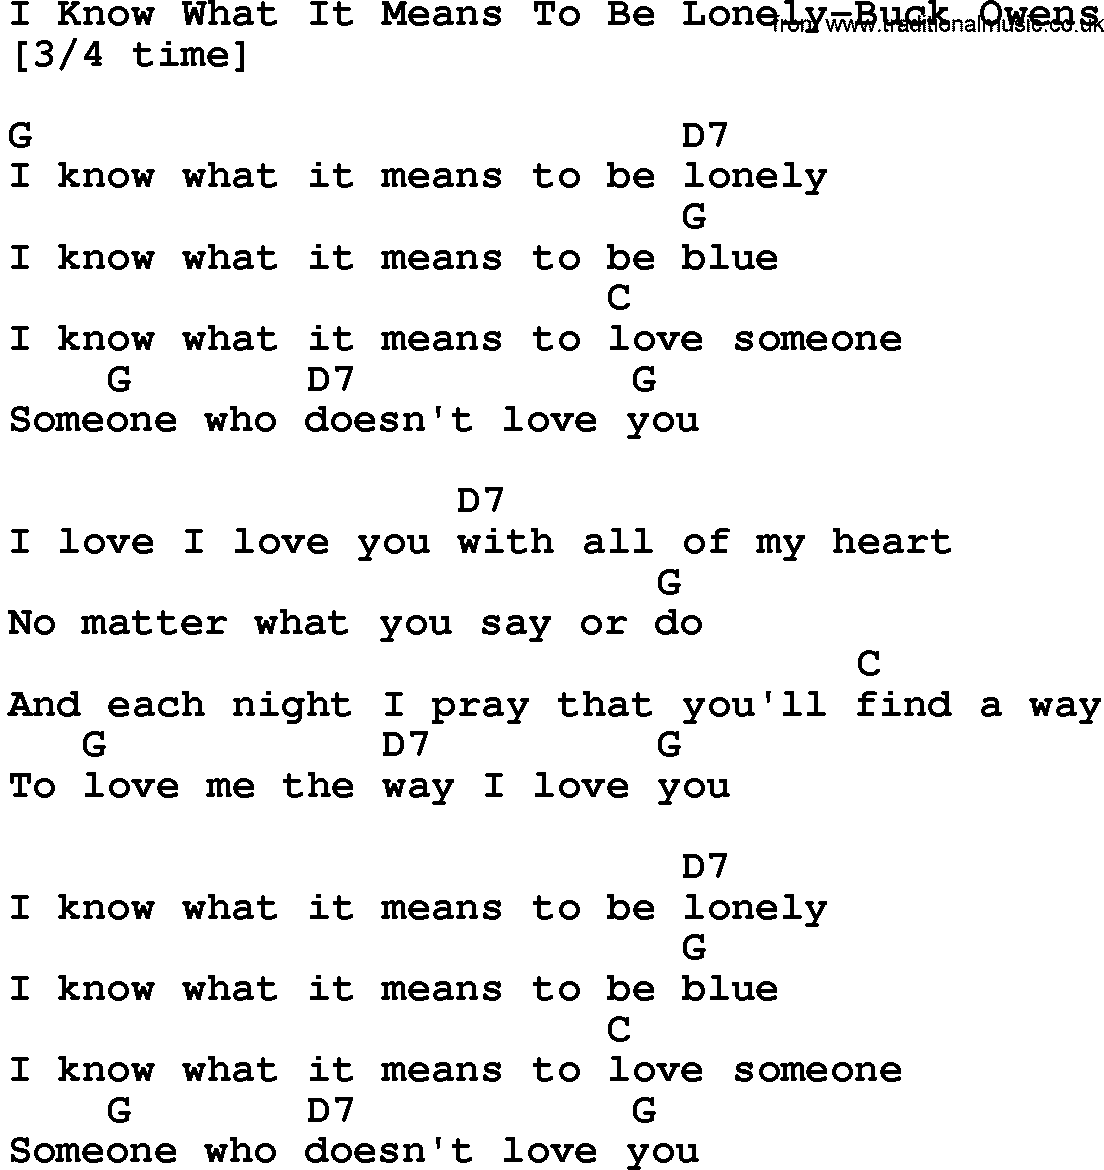 Country music song: I Know What It Means To Be Lonely-Buck Owens lyrics and chords